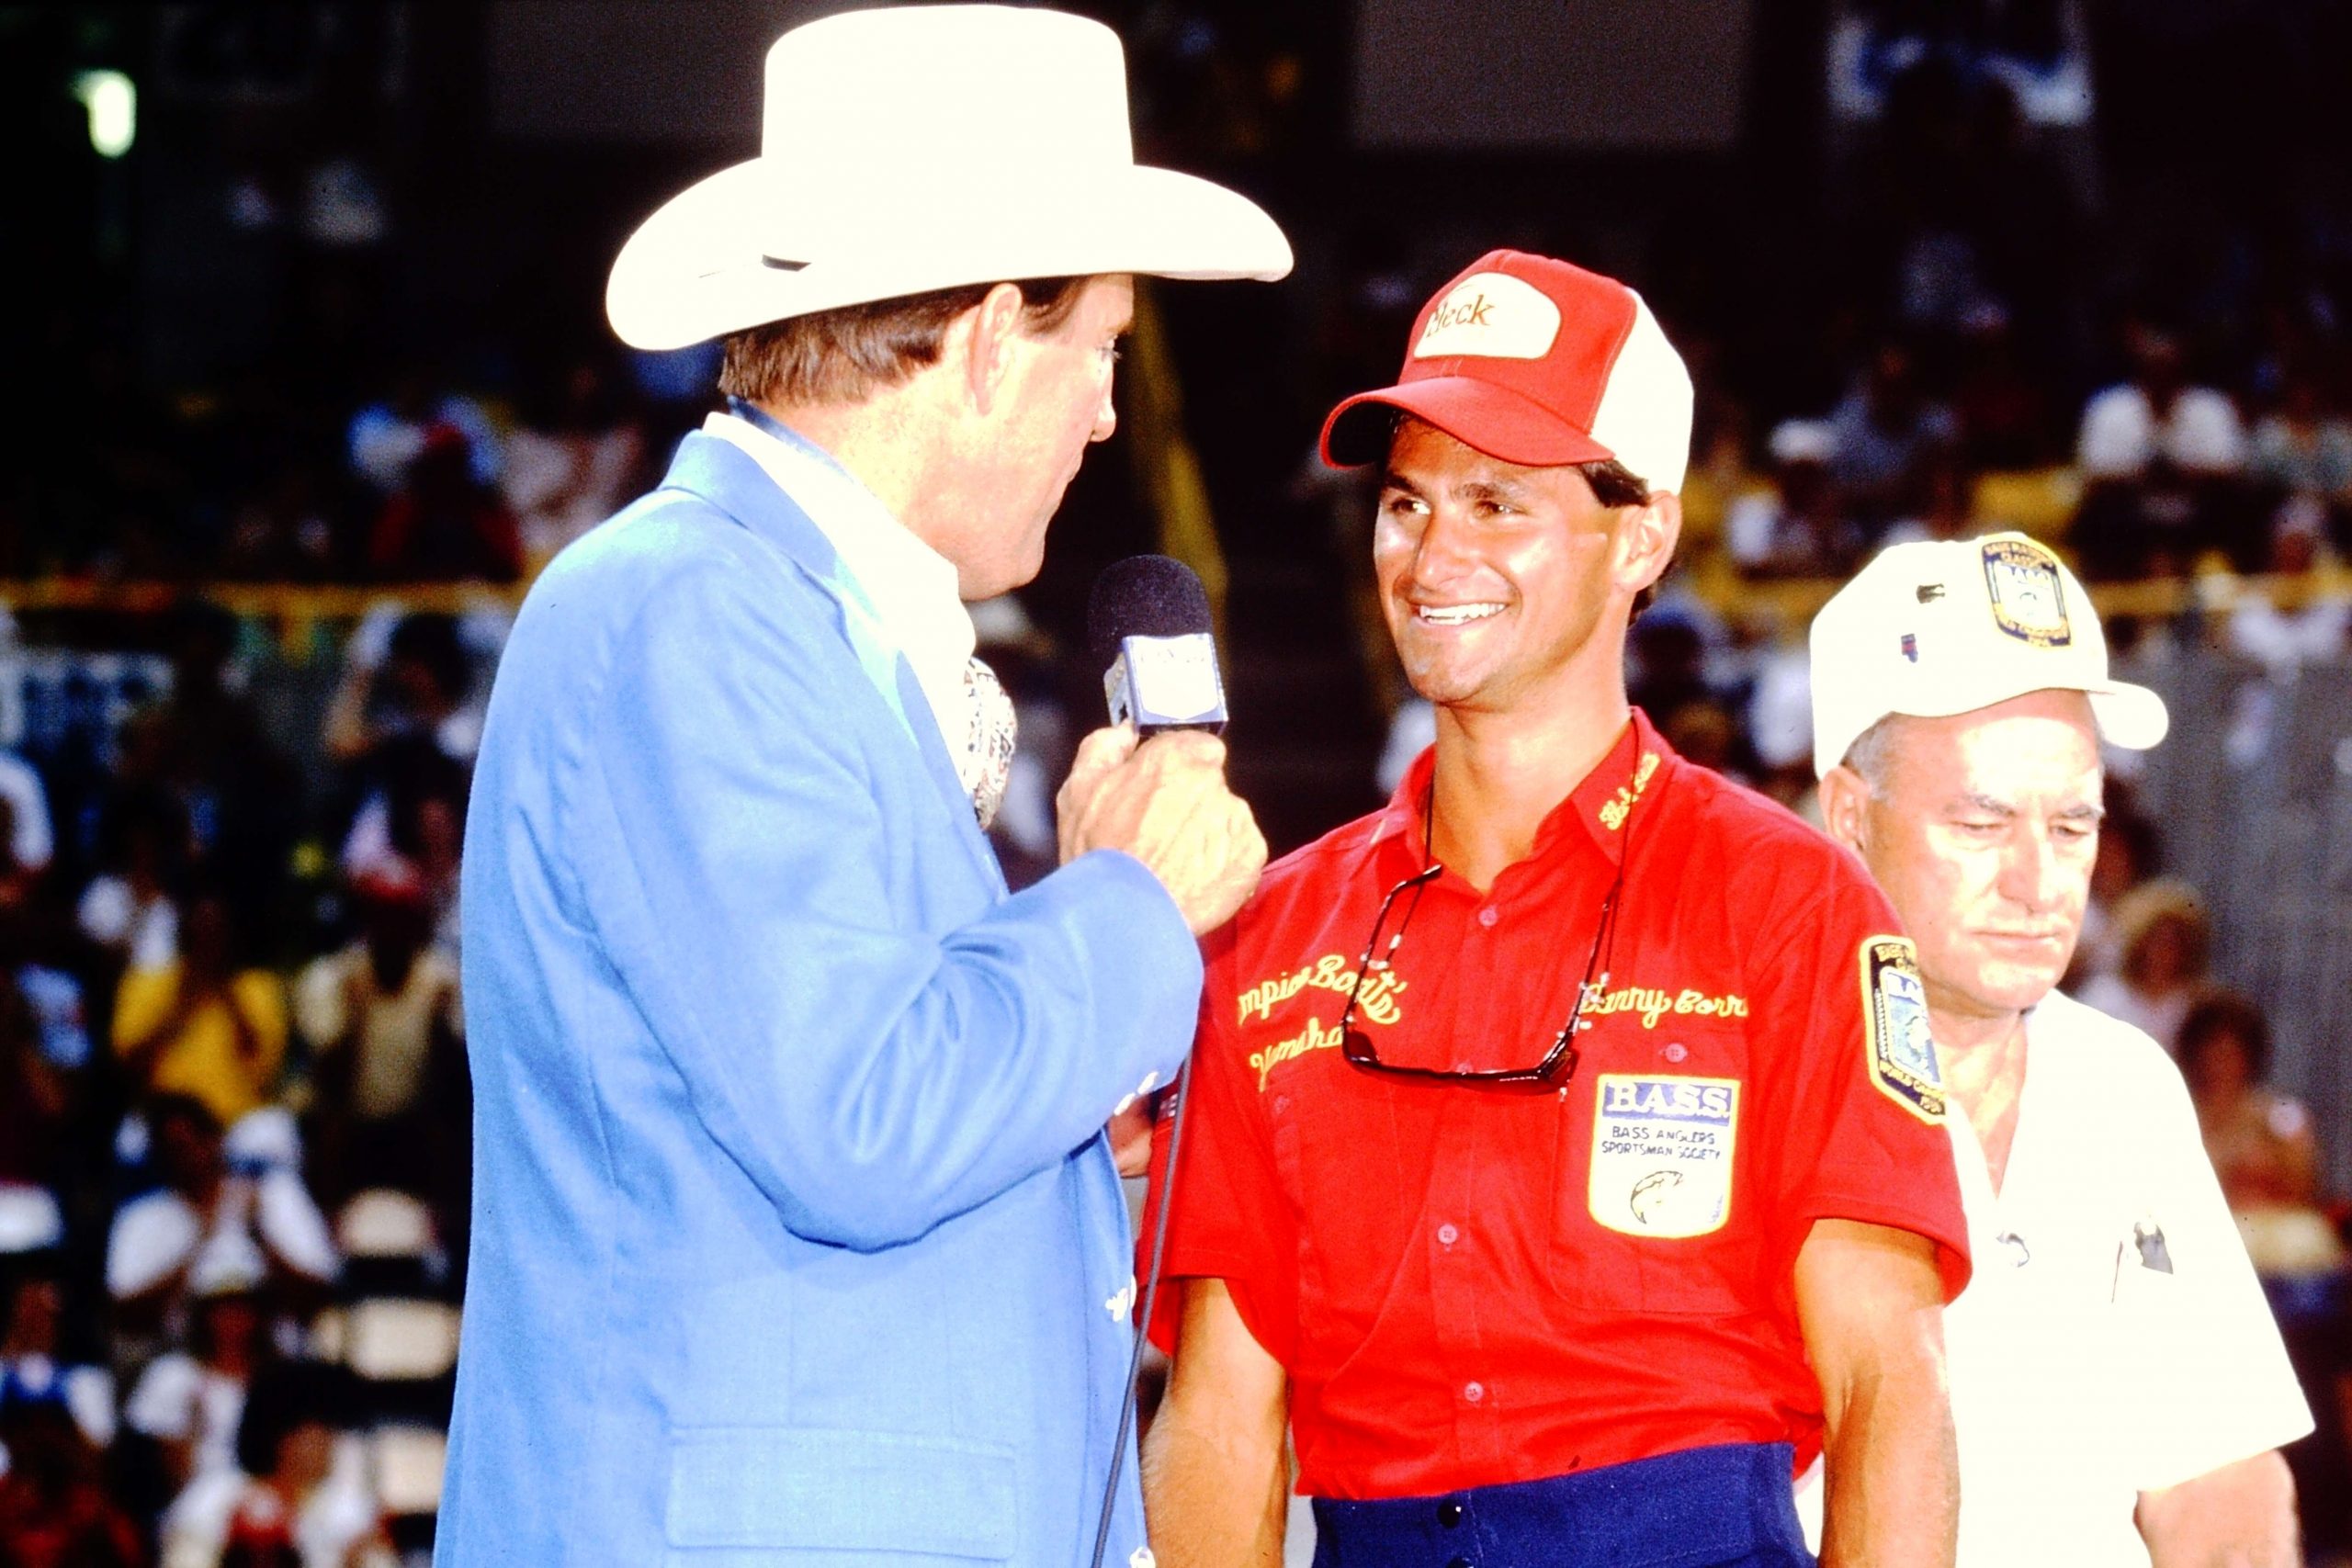 Danny Correia was a big story at the 1986 Classic. The 24-year-old had qualified through the Federation, which is now called the B.A.S.S. Nation, and told a reporter heâd half considered asking pros for their autographs while they were waiting to lock through.